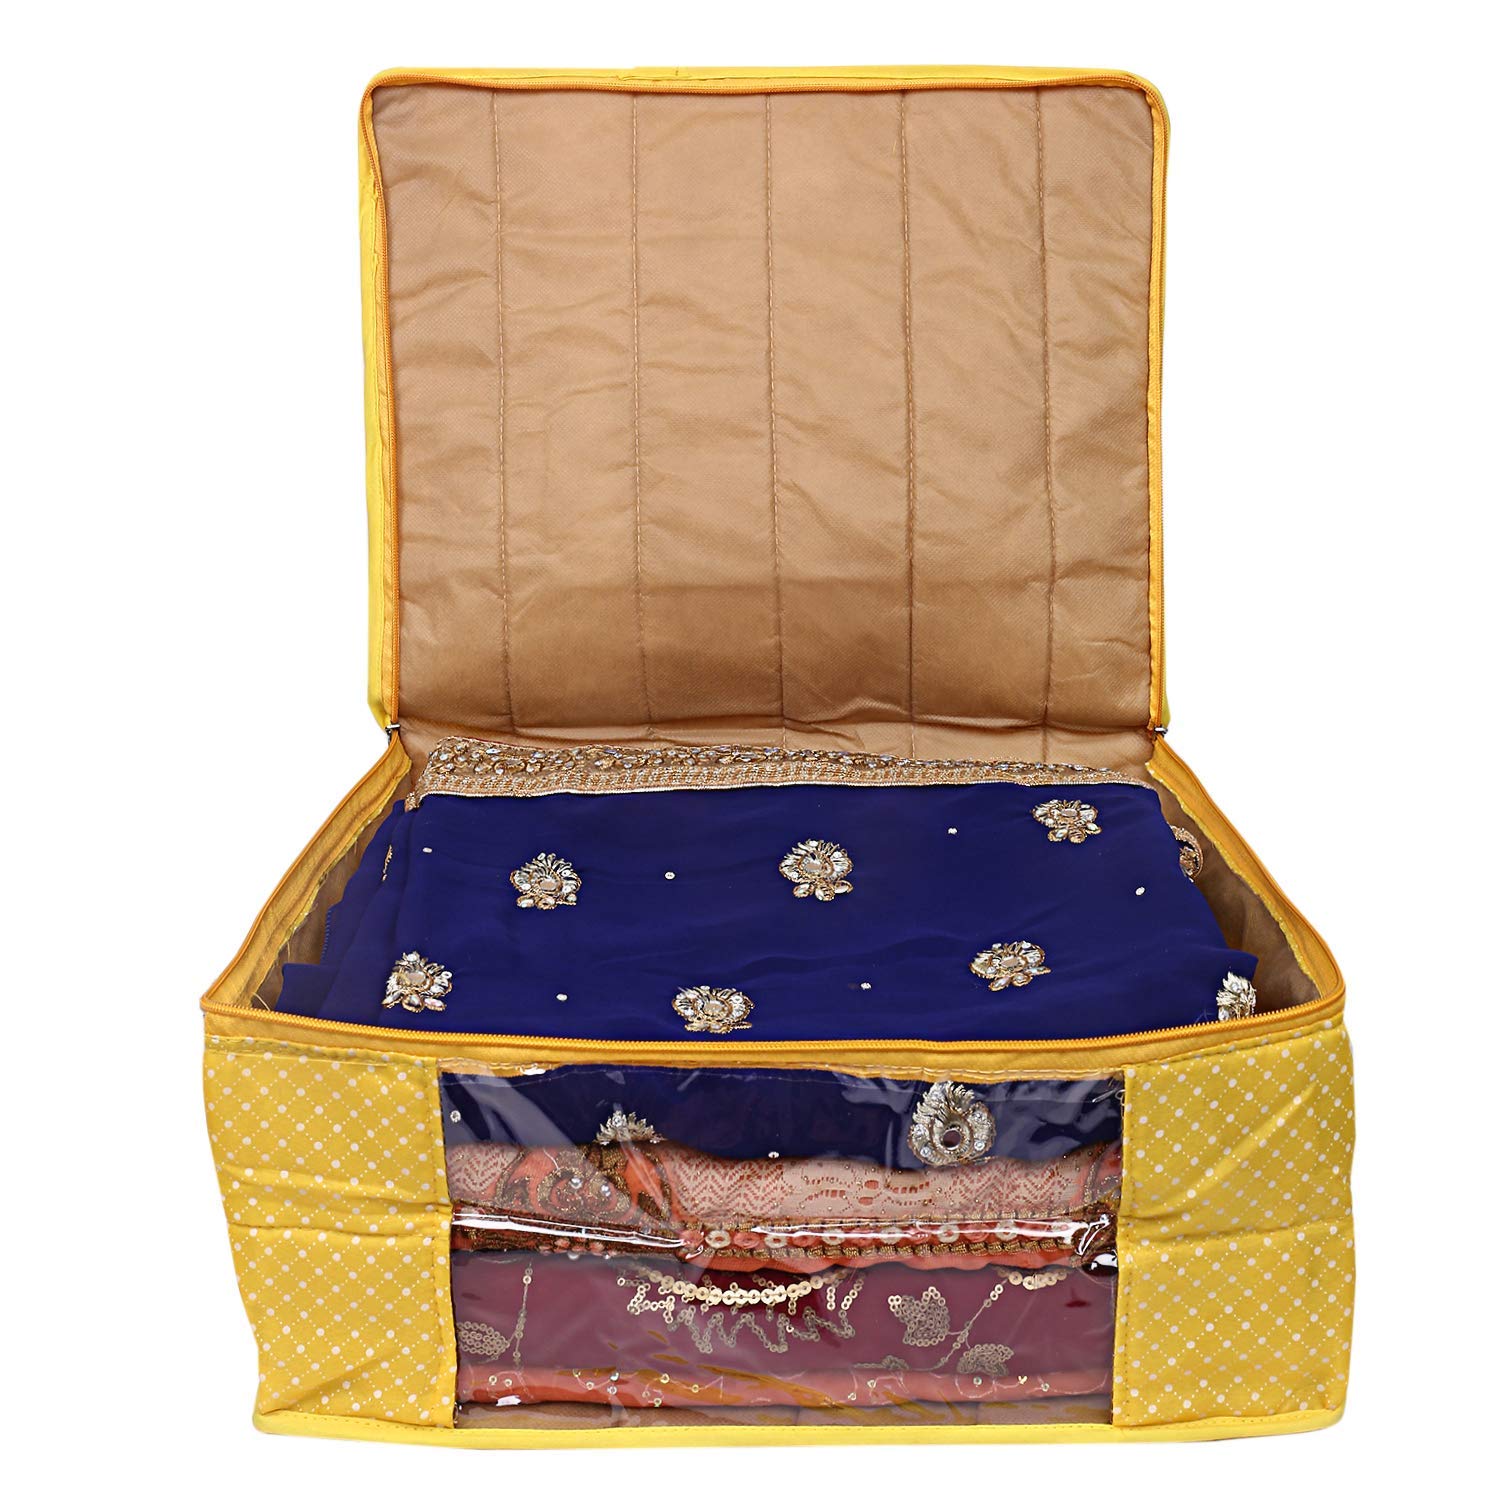 Kuber Industries Polka Dots 2 Pieces Cotton 3 Layered Quilted Saree Cover (Blue & Yellow) - CTKTC31117